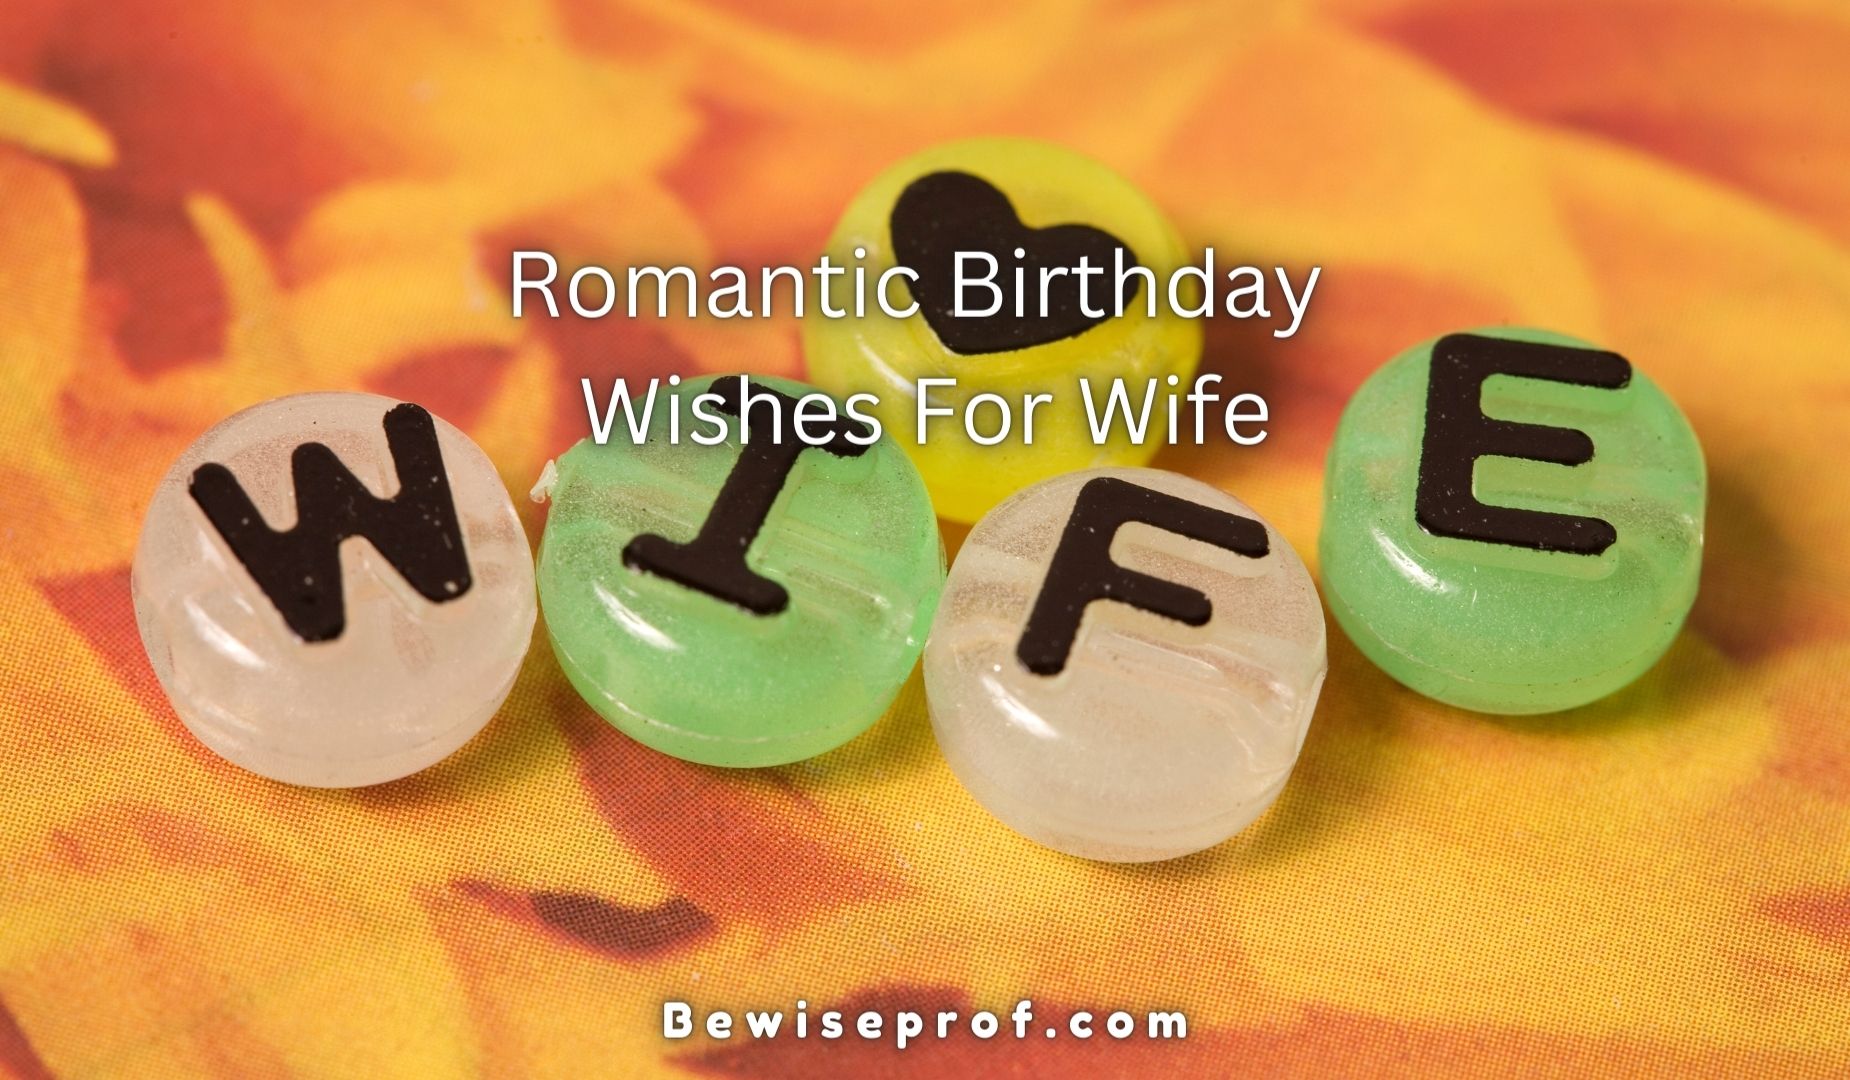 Romantic Birthday Wishes For Wife